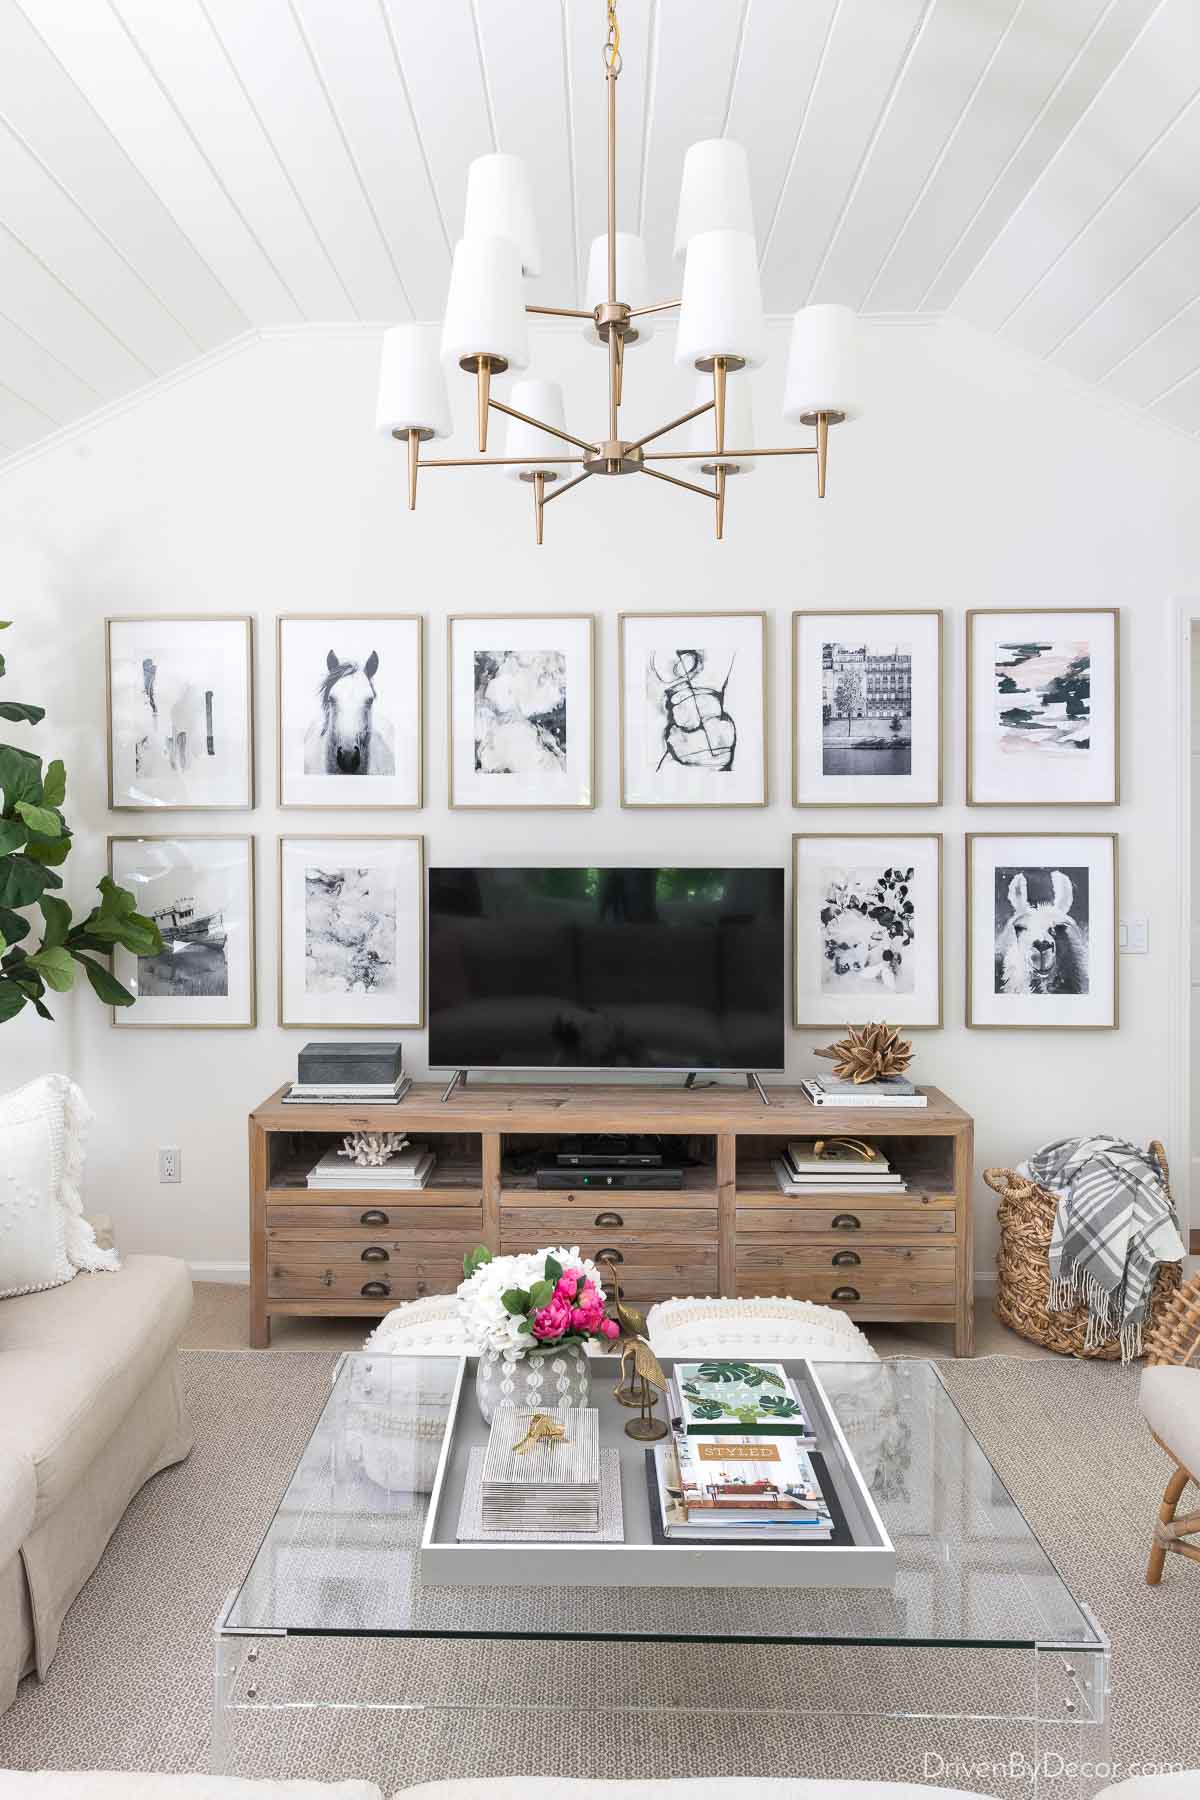 10 Gallery Wall Layouts That Will Transform Your Space! - Driven by Decor